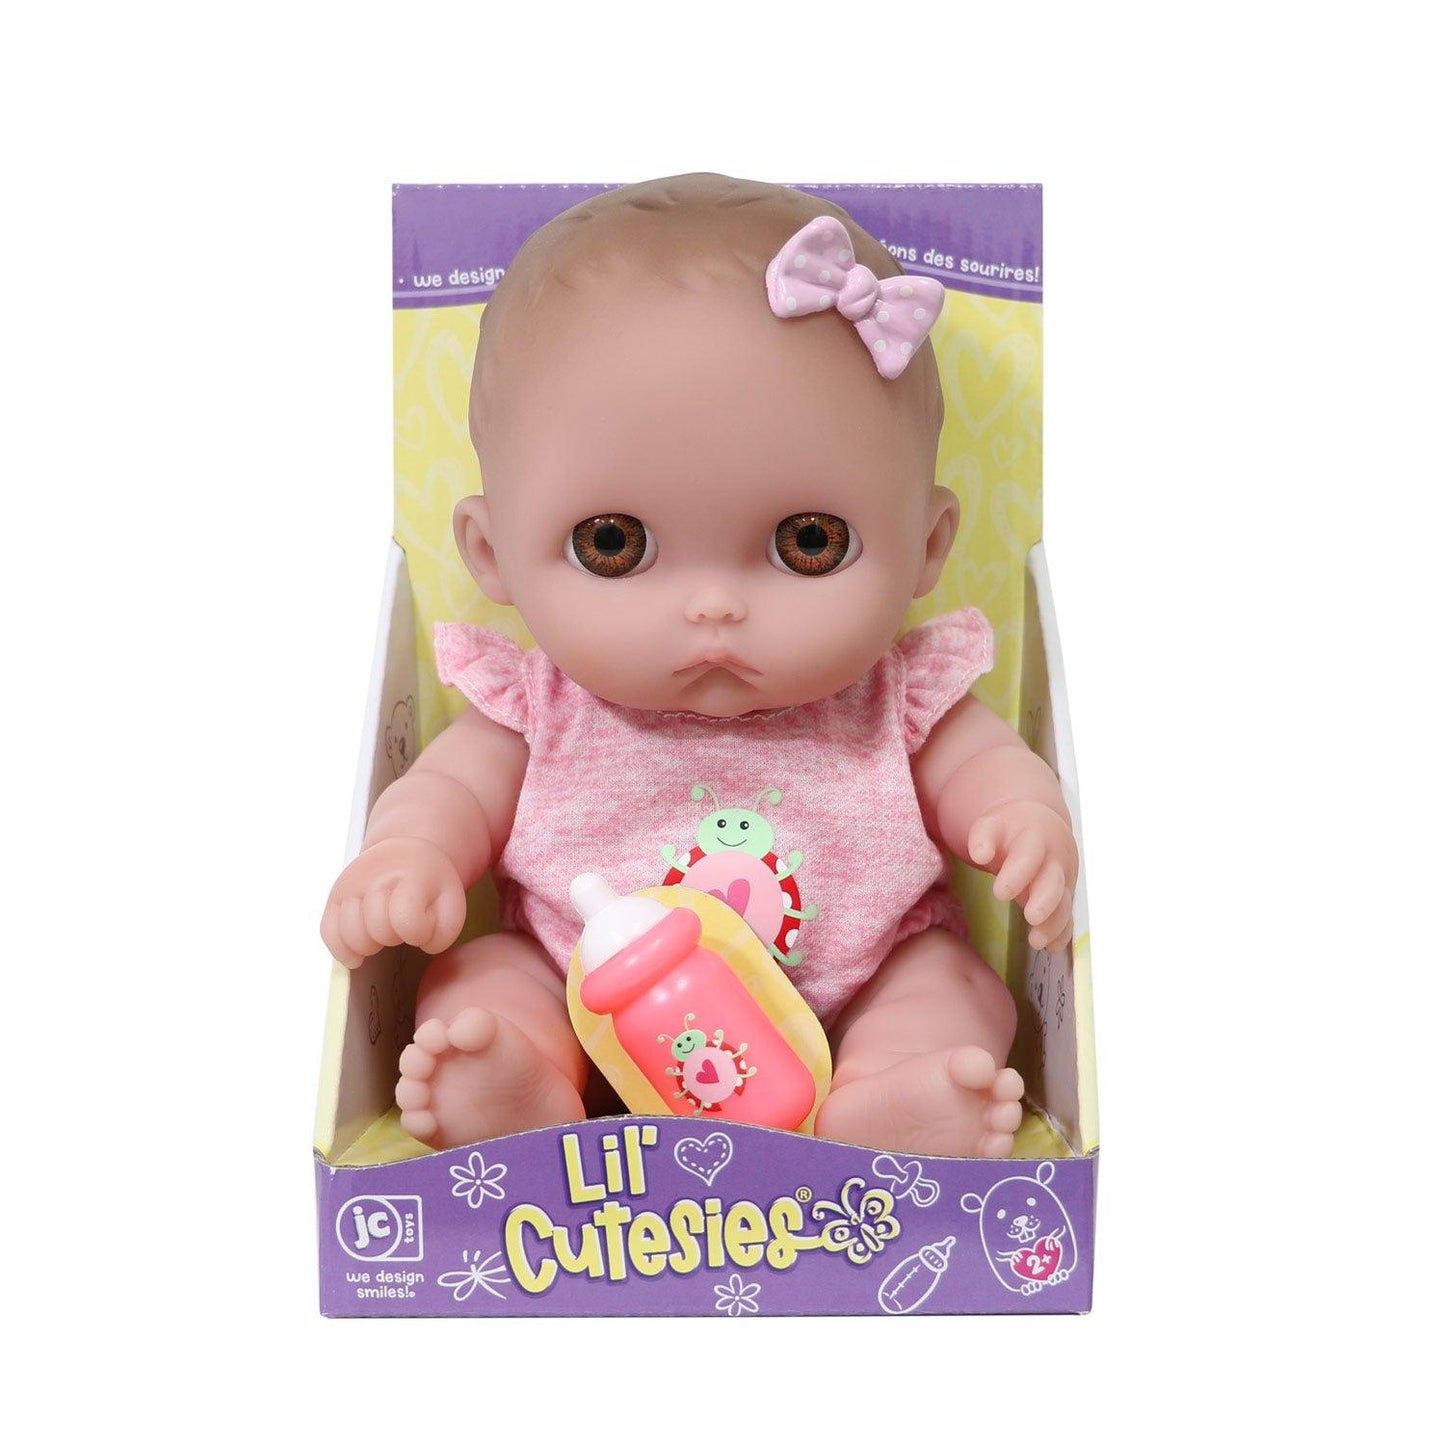 Lil Cutesies, Mimi 8.5" All Vinyl Baby Doll with Brown Eyes and Removable Outfit Ages 2+ - JC Toys Group Inc.